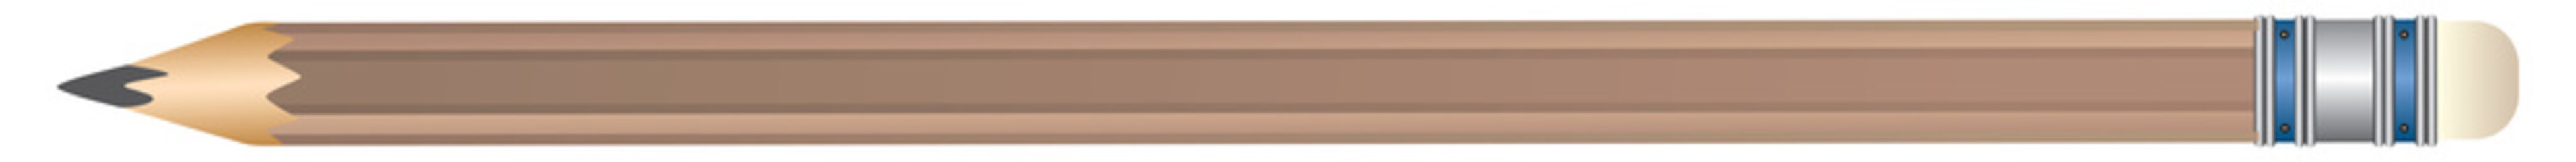 illustration of a pencil on a white background